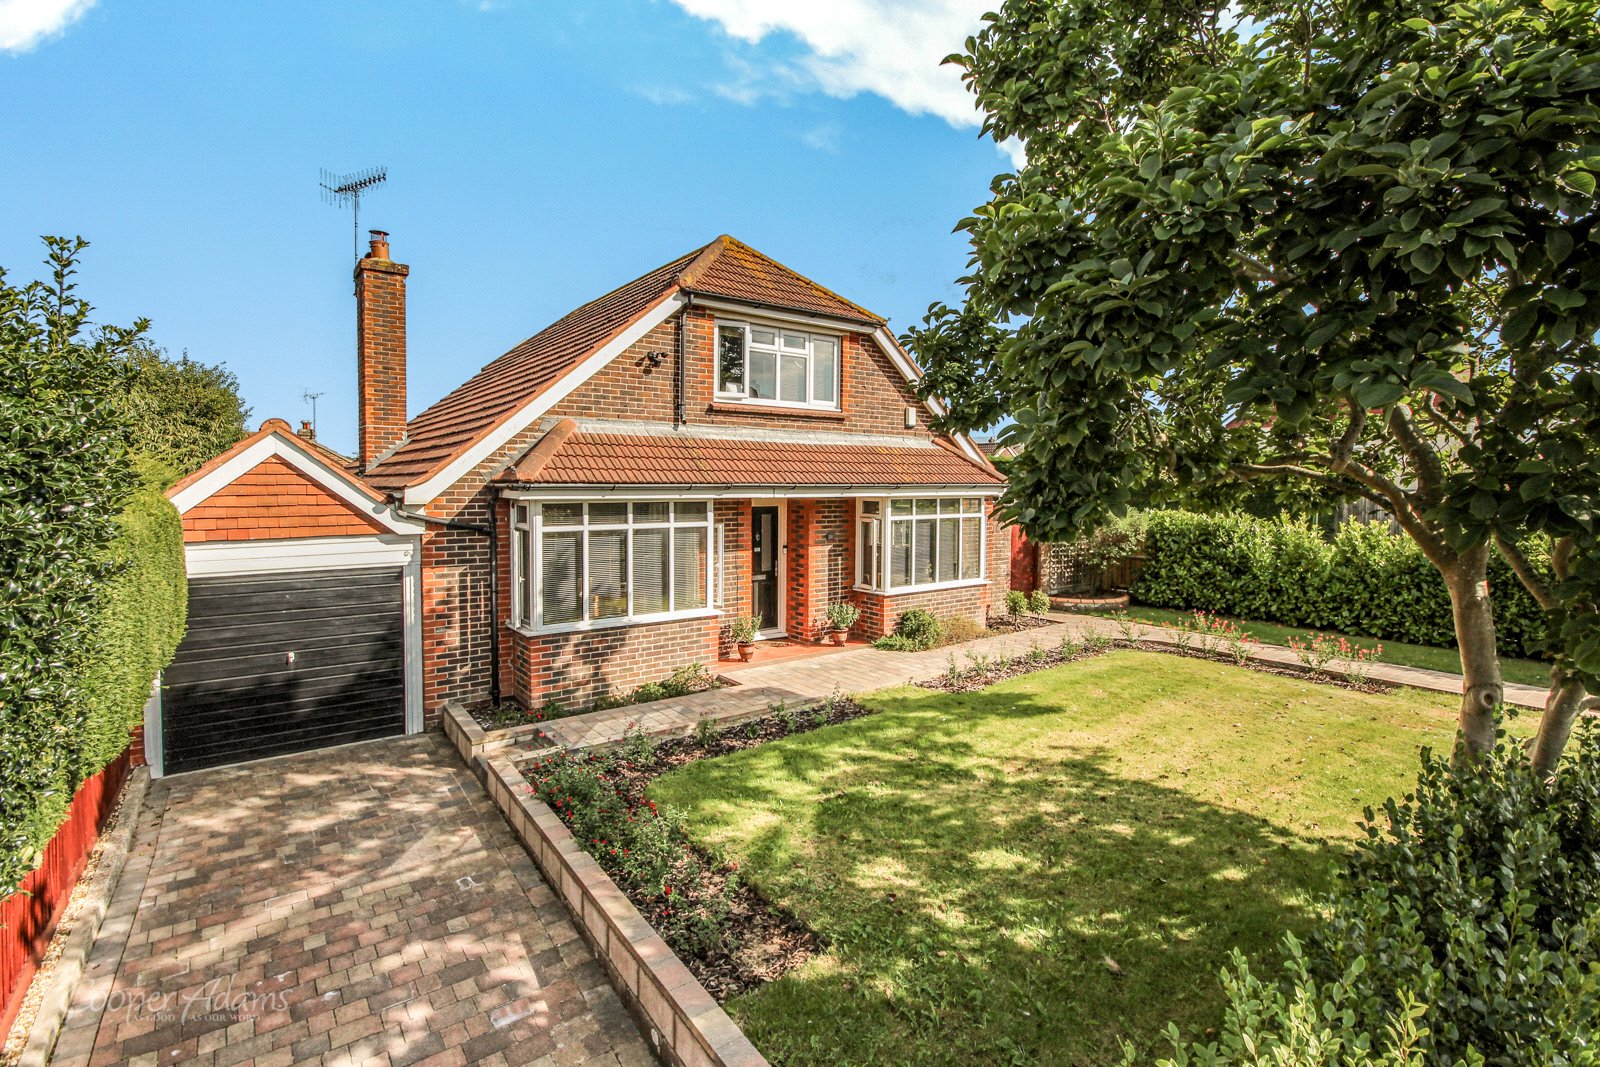 3 bed  for sale in Mill Lane, Rustington, BN16